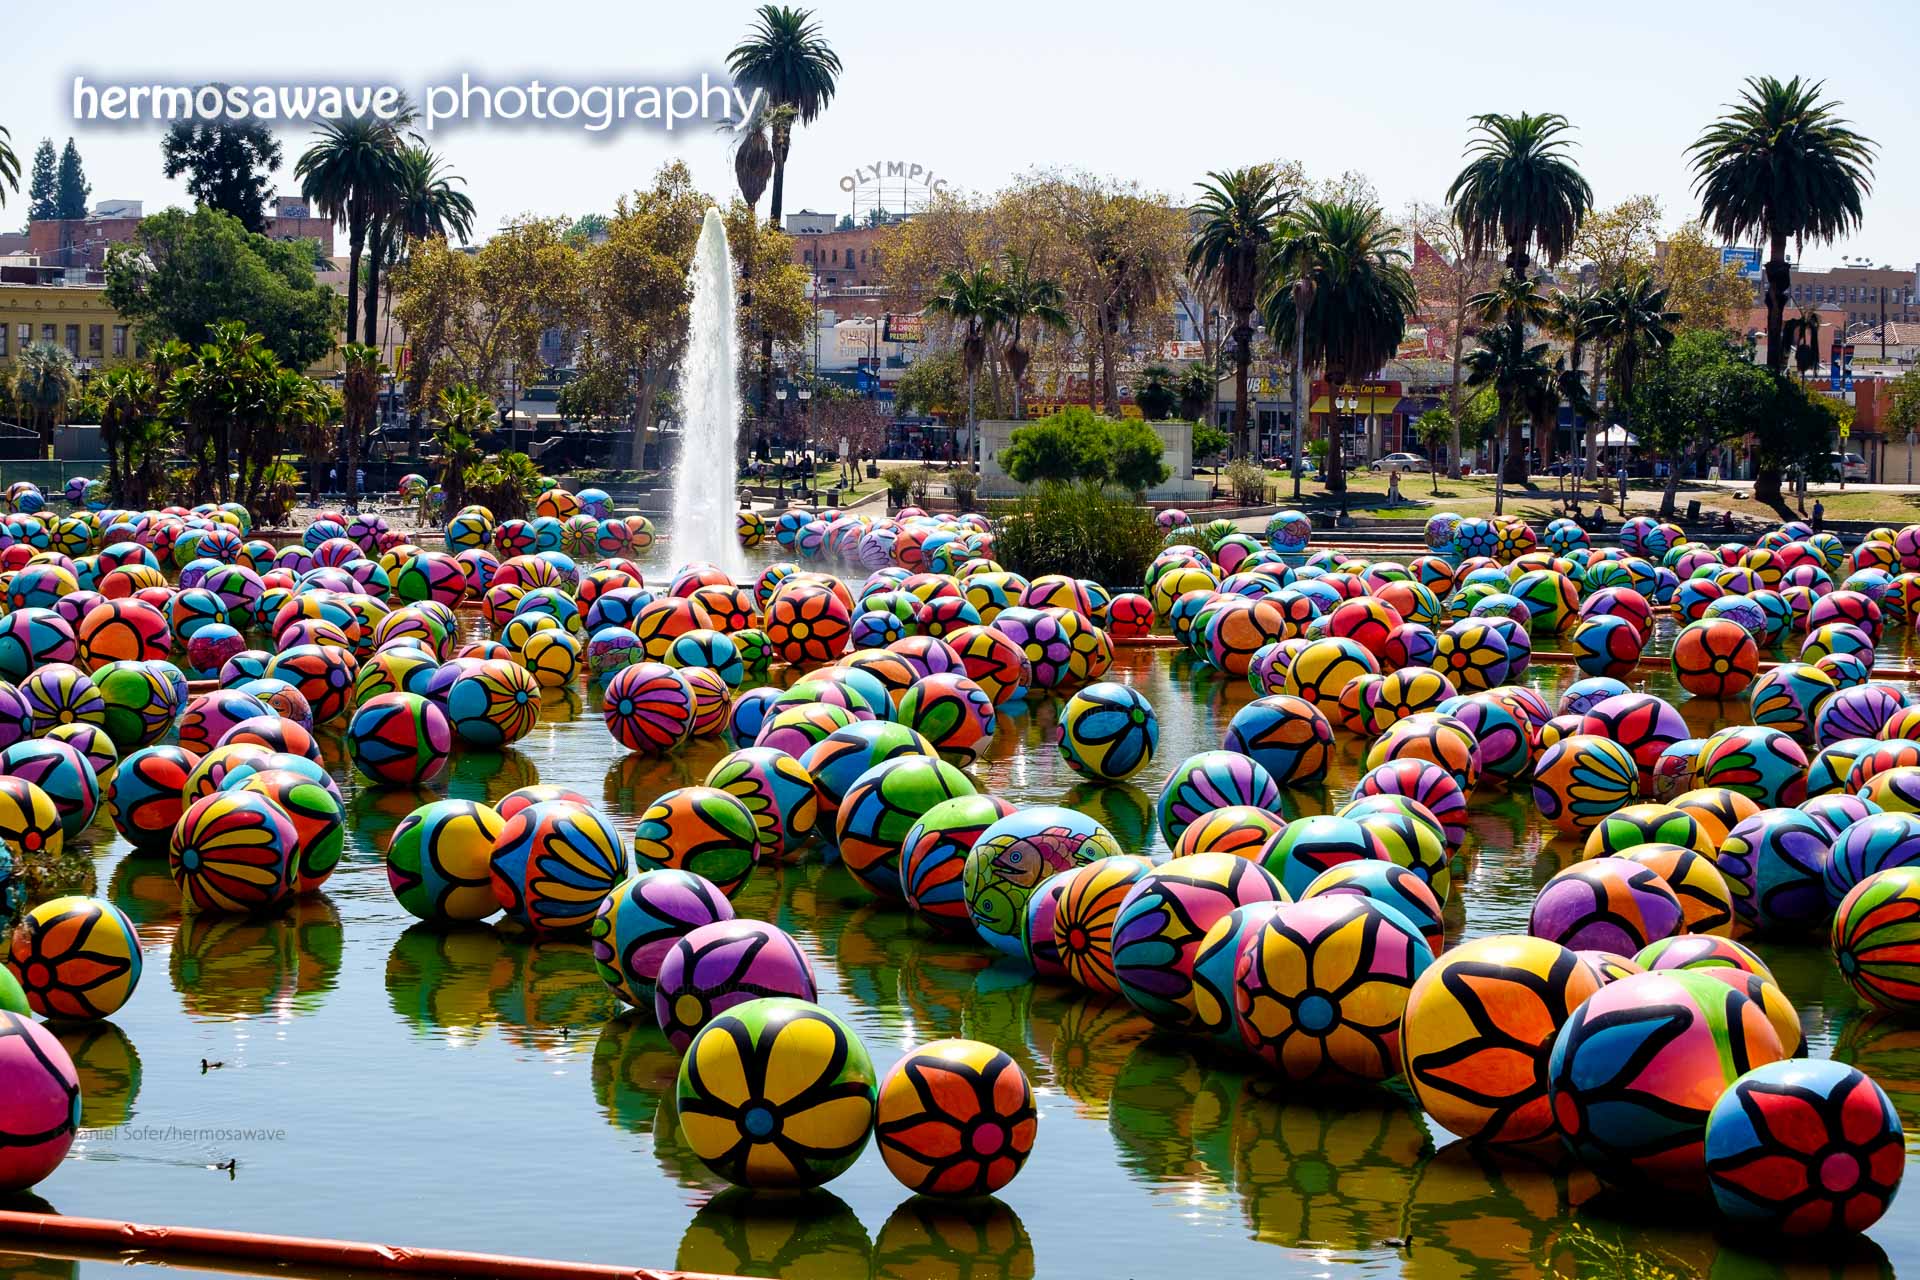 The Spheres at MacArthur Park